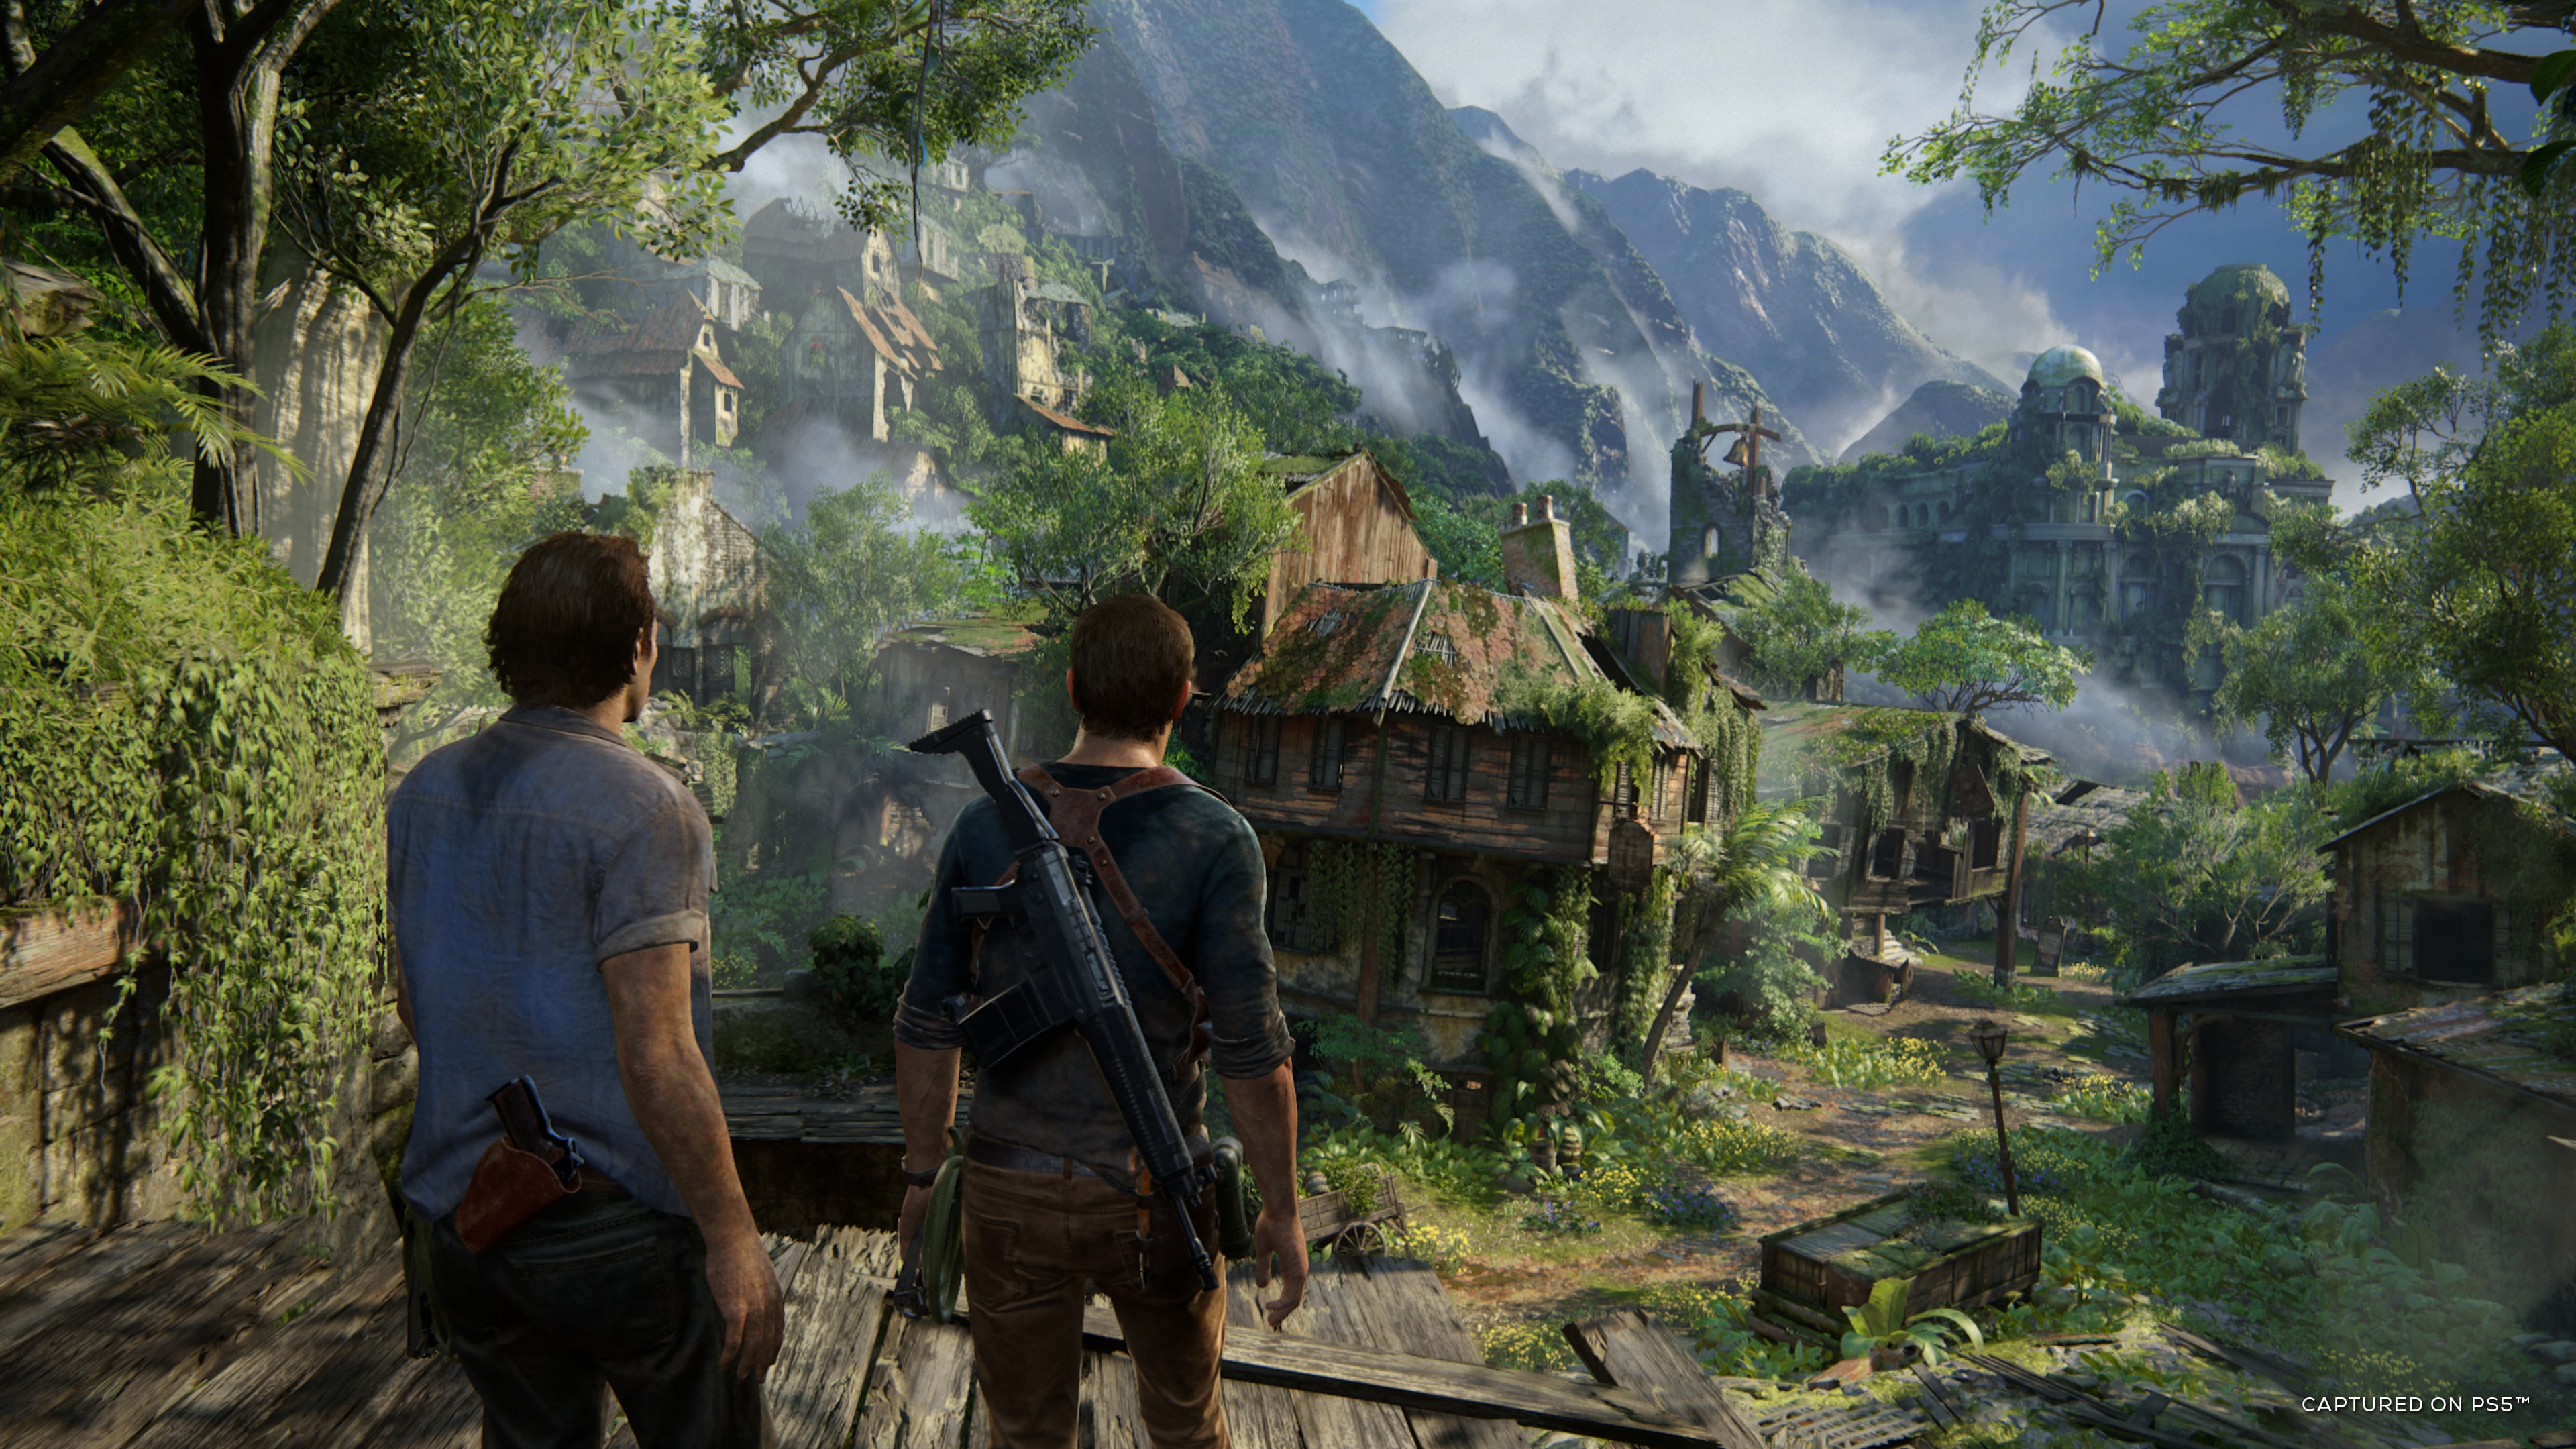 Uncharted 4: A Thief's End on PS4 — price history, screenshots